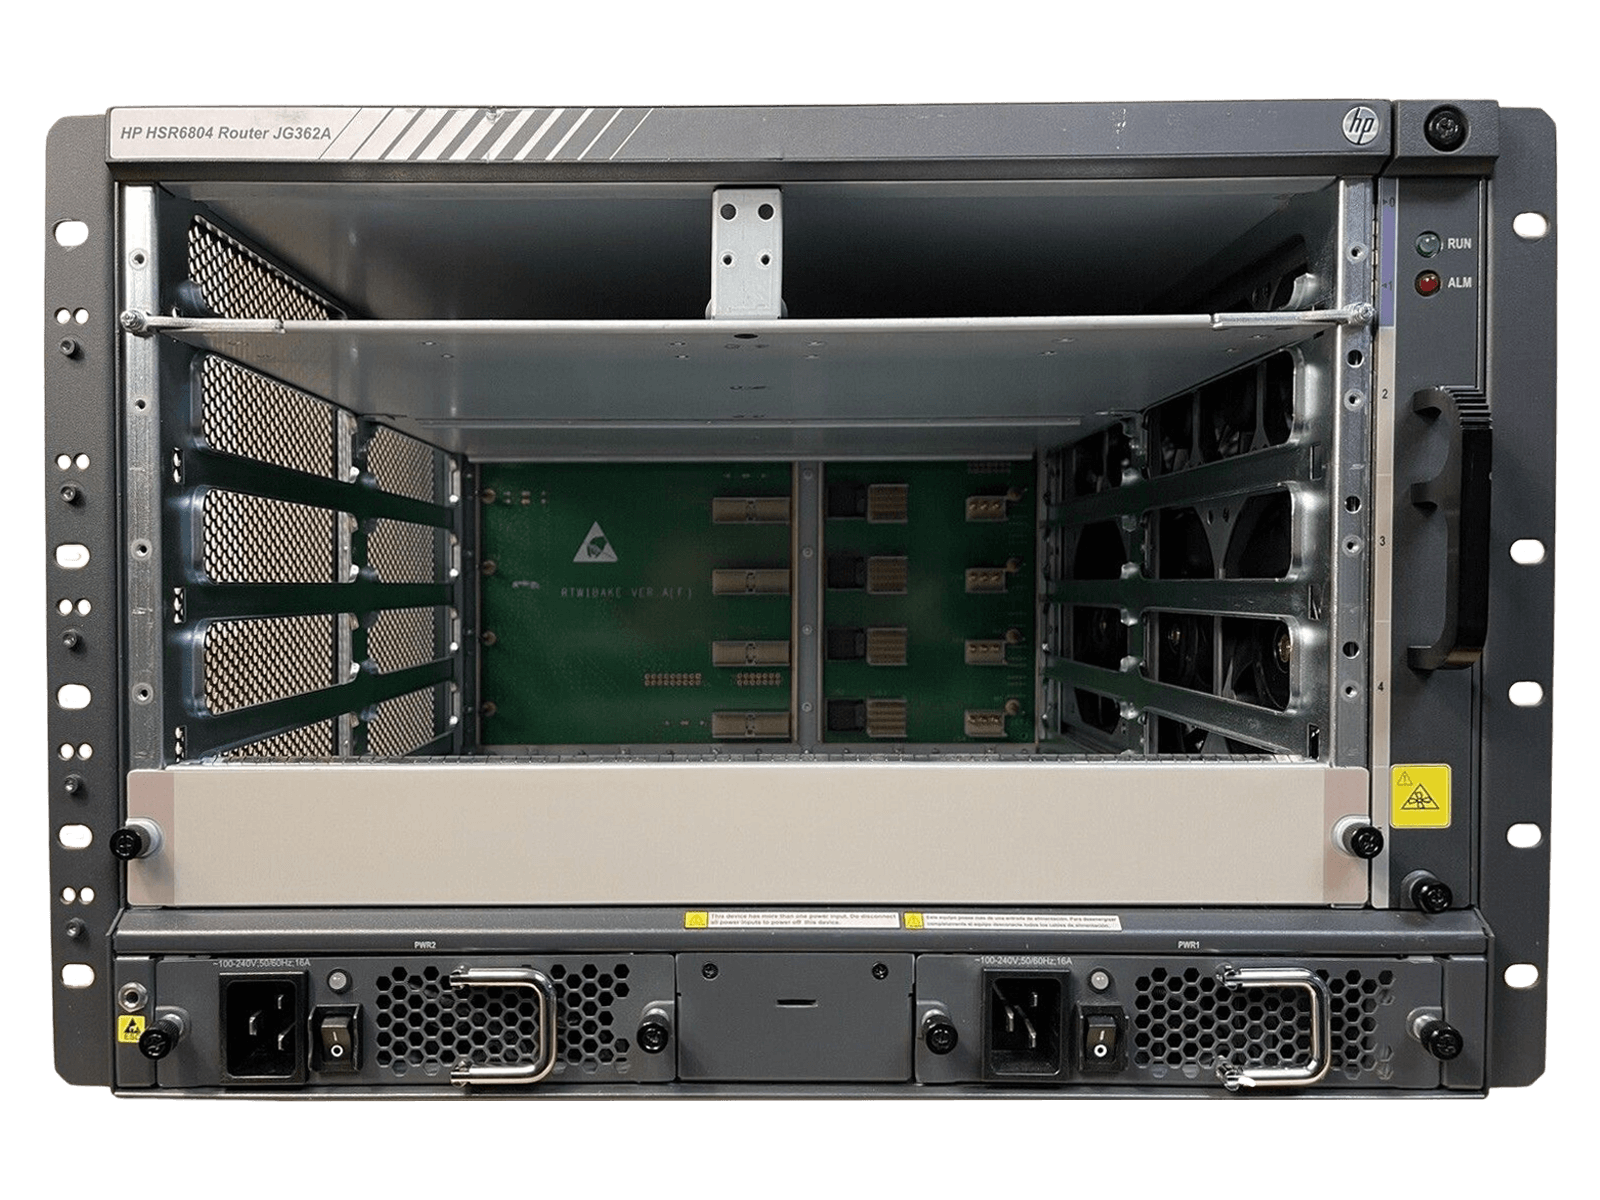 HP JG362A FlexNetwork HSR6804 RSE-X2 Router Chassis JG362A with 2x AC 1200W PSU JG335A.